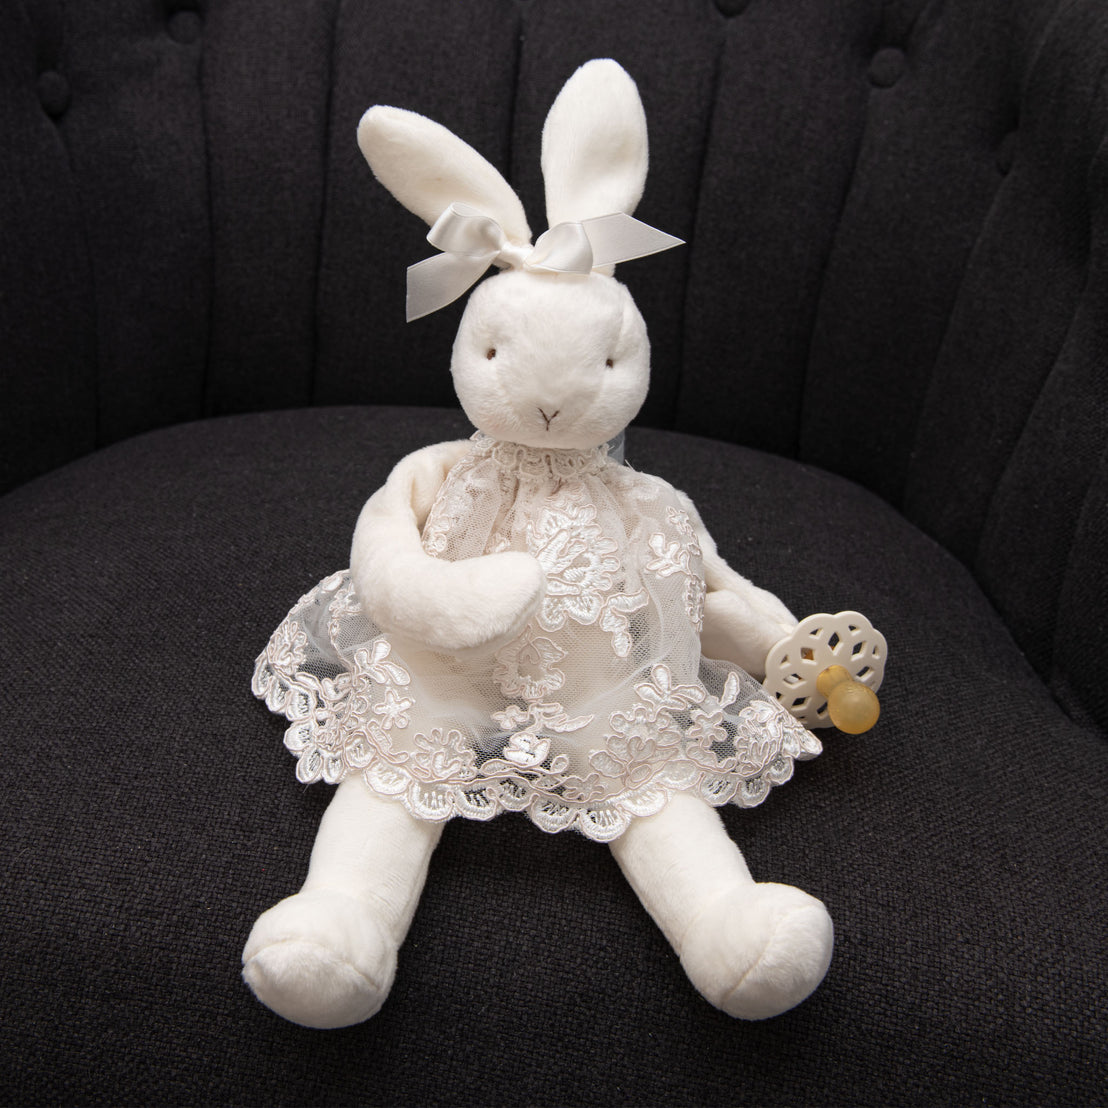 Product photo of the Plush Bunny Doll pacifier holder wearing lace from the Penelope christening dress.